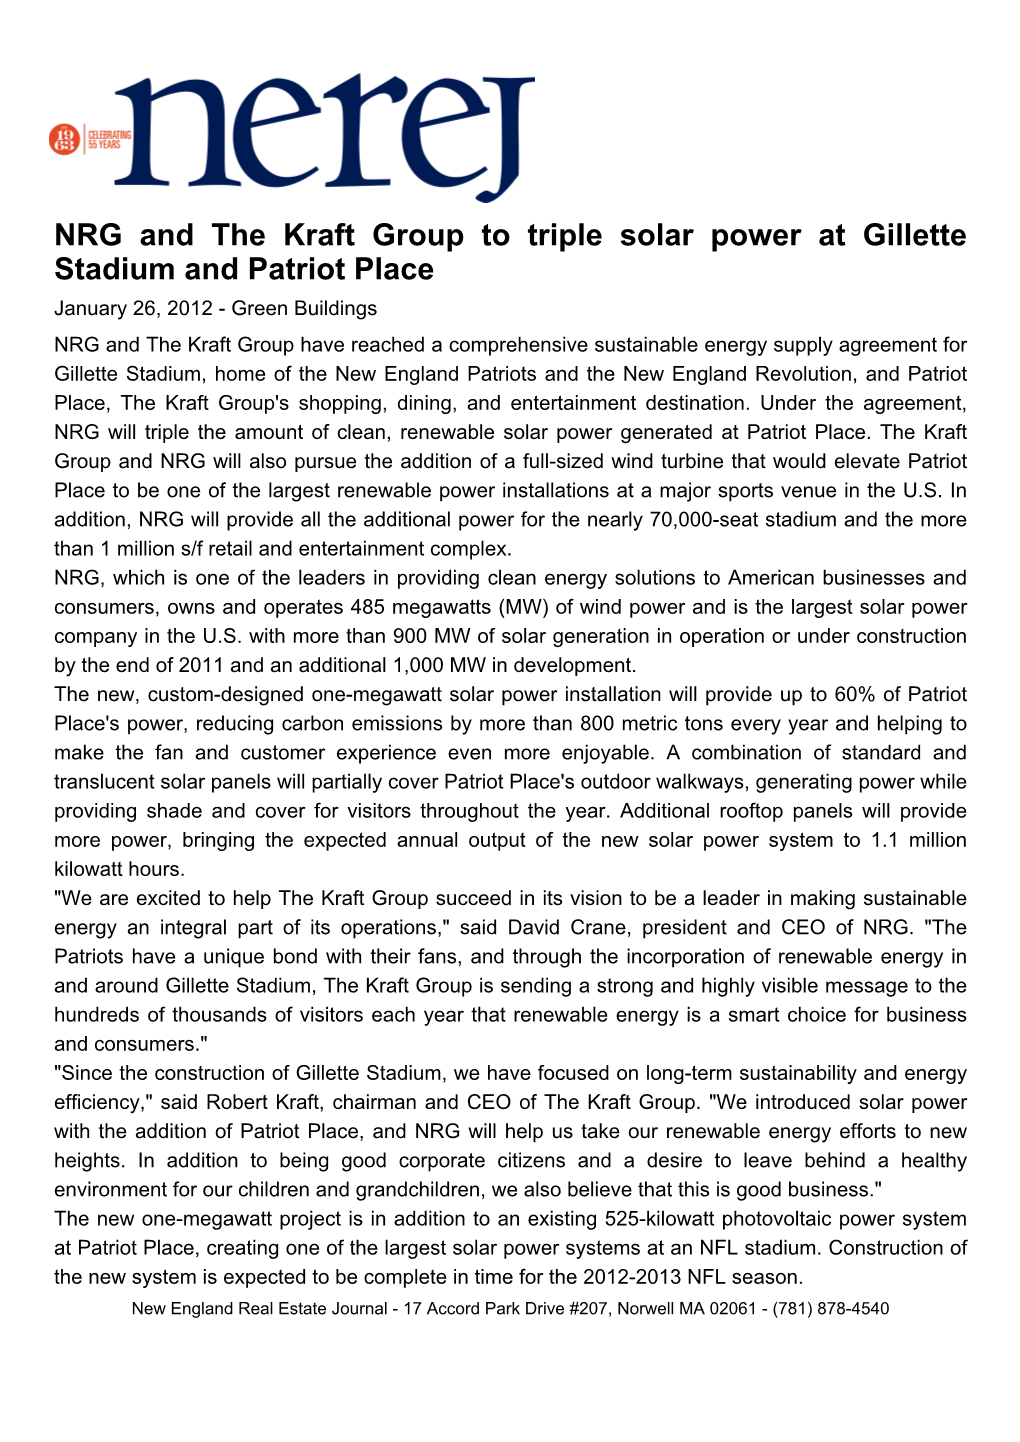 NRG and the Kraft Group to Triple Solar Power at Gillette Stadium And